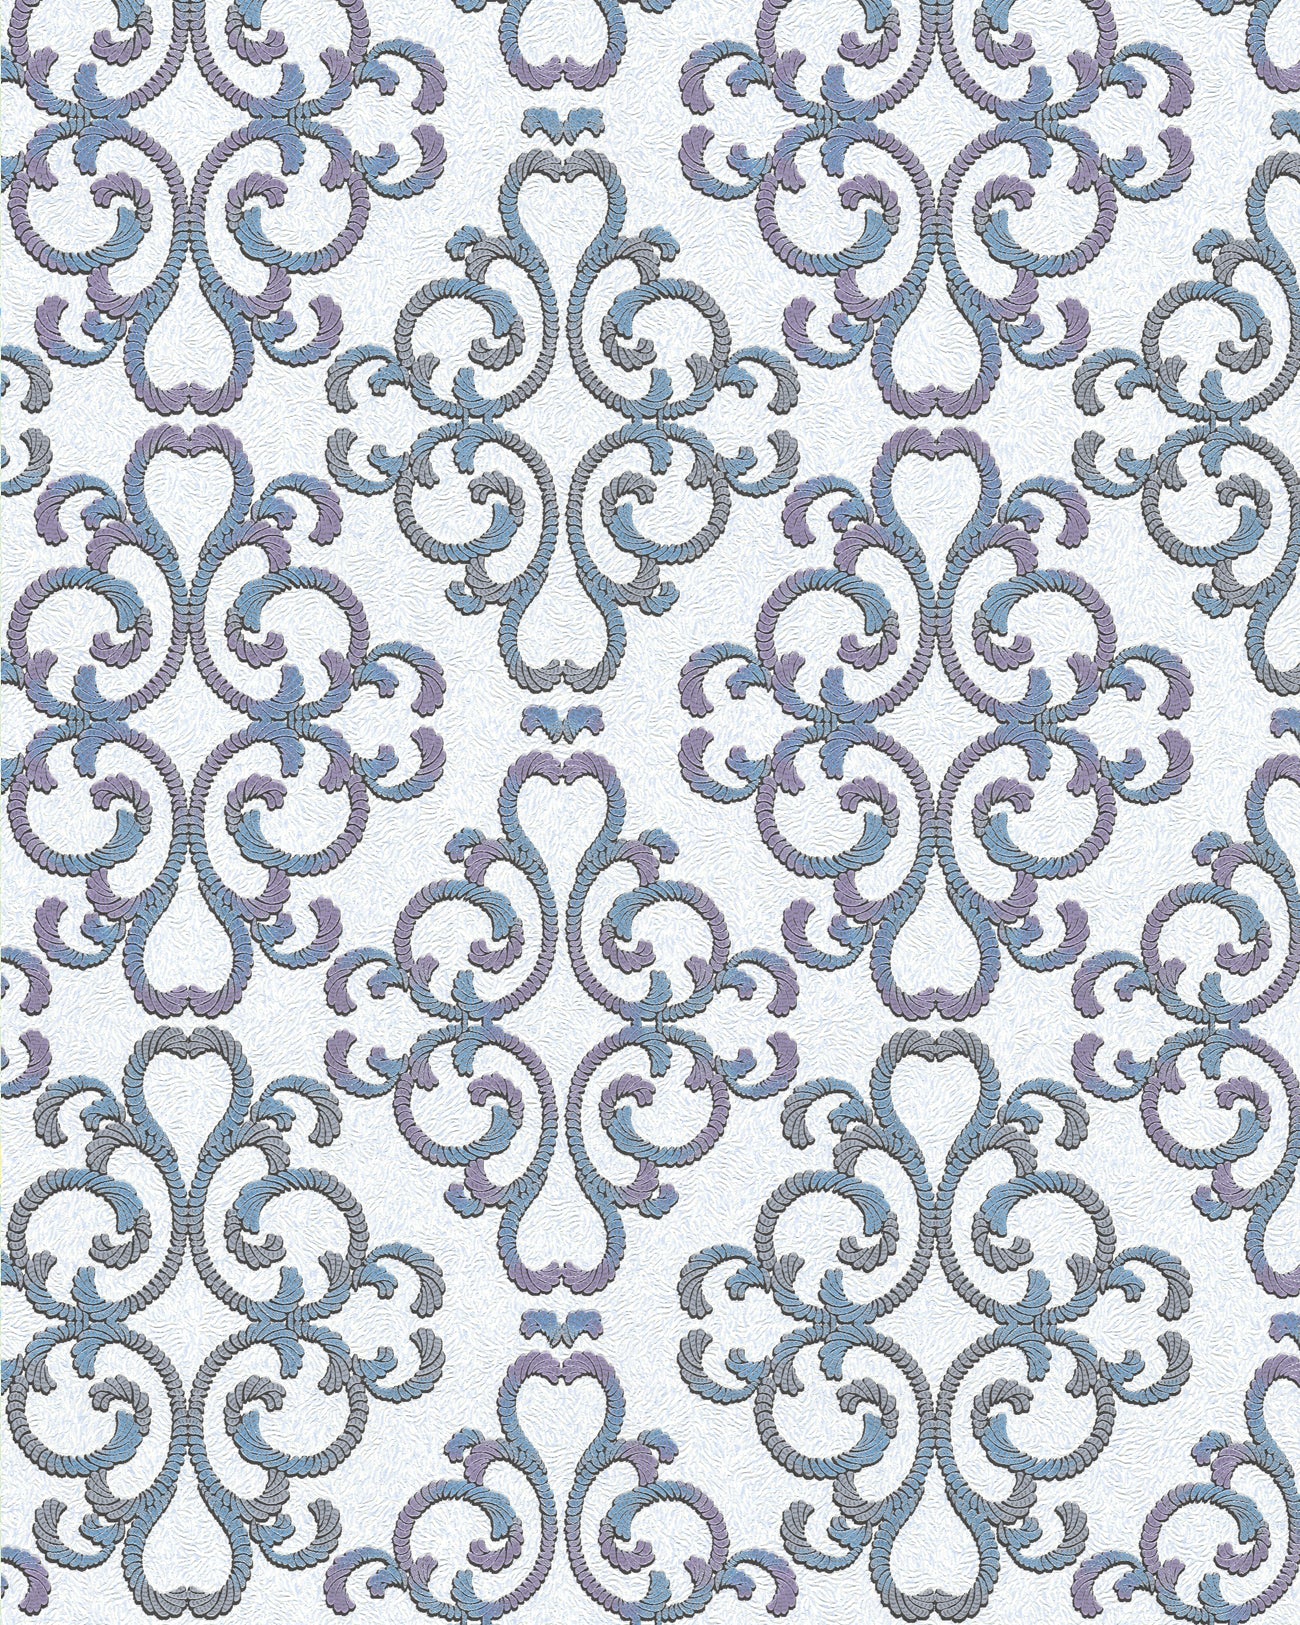 Baroque wallpaper EDEM 85037BR30 textured wallpaper in shiny baroque style white blue-turquoise purple silver 5.33 m2